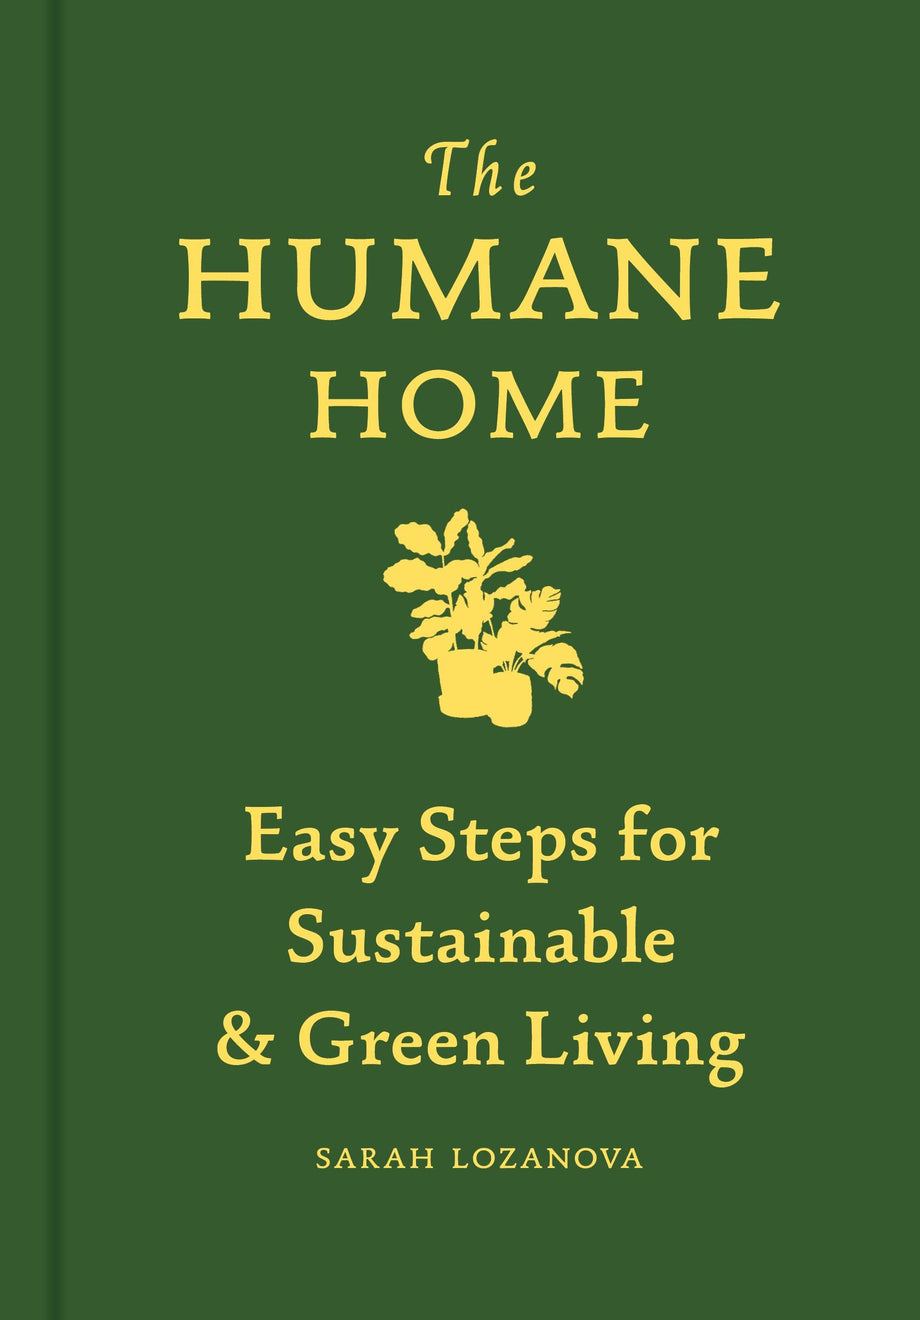 Sustainable Living 101: Easy Steps to Make a Big Difference